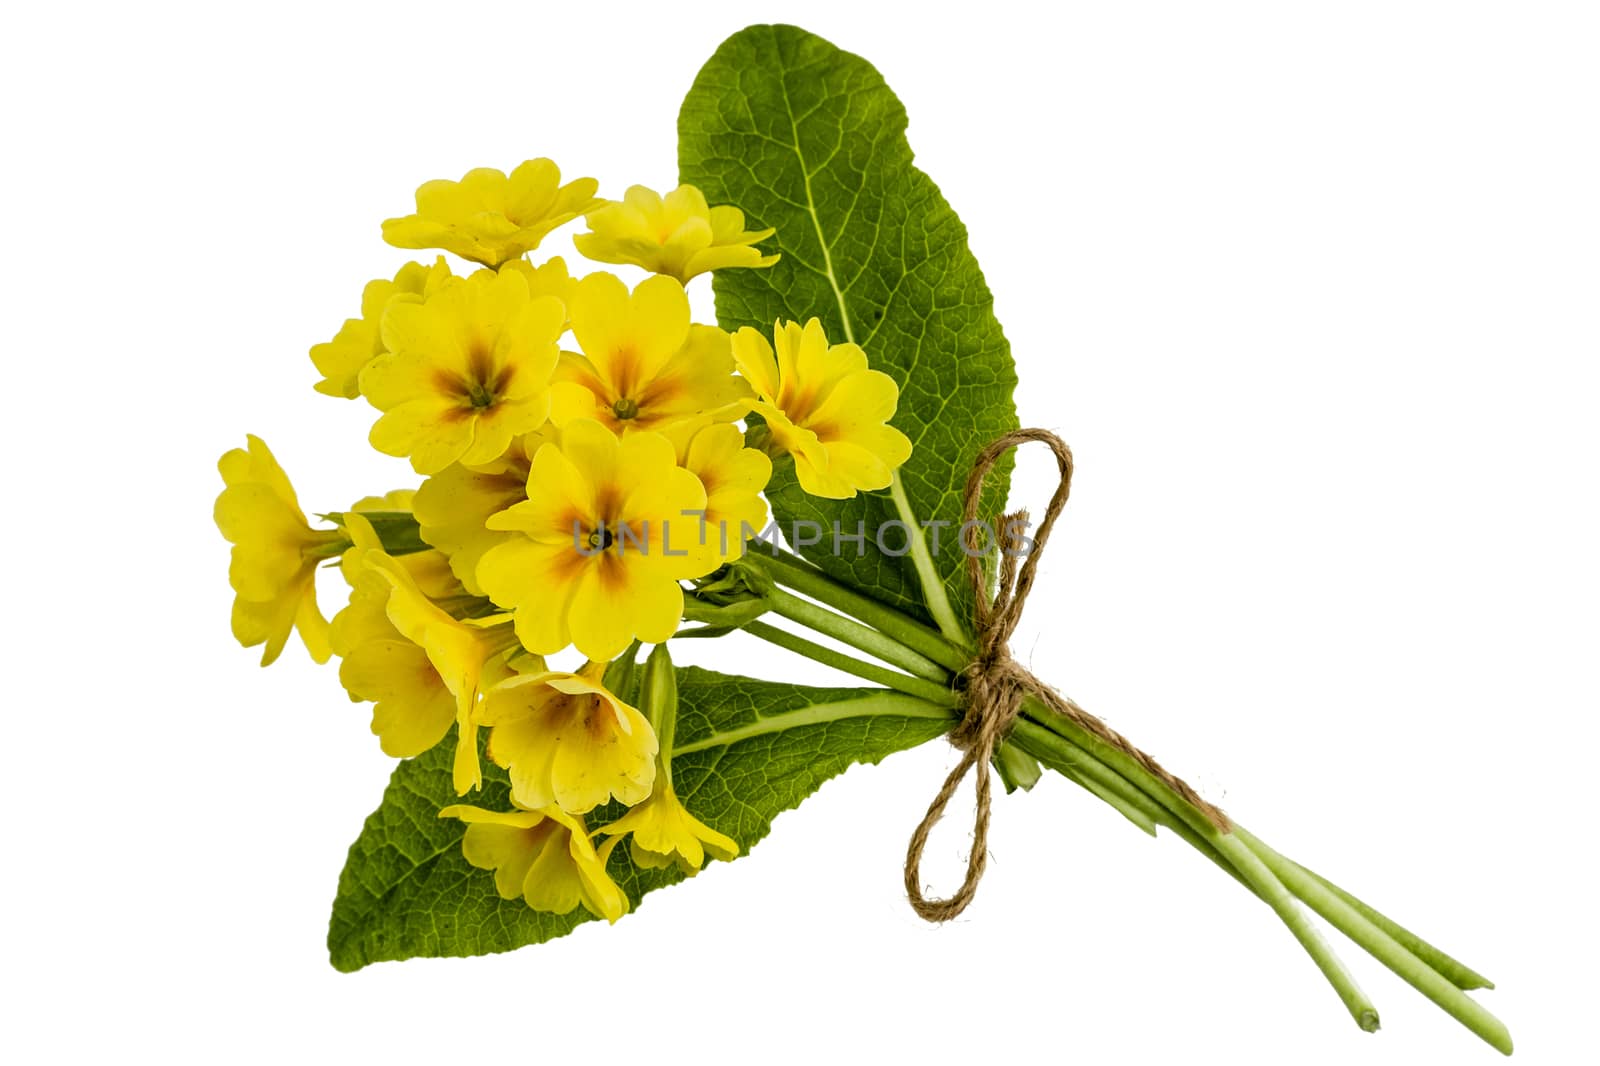 Bouquet of yellow primroses, isolated on white background